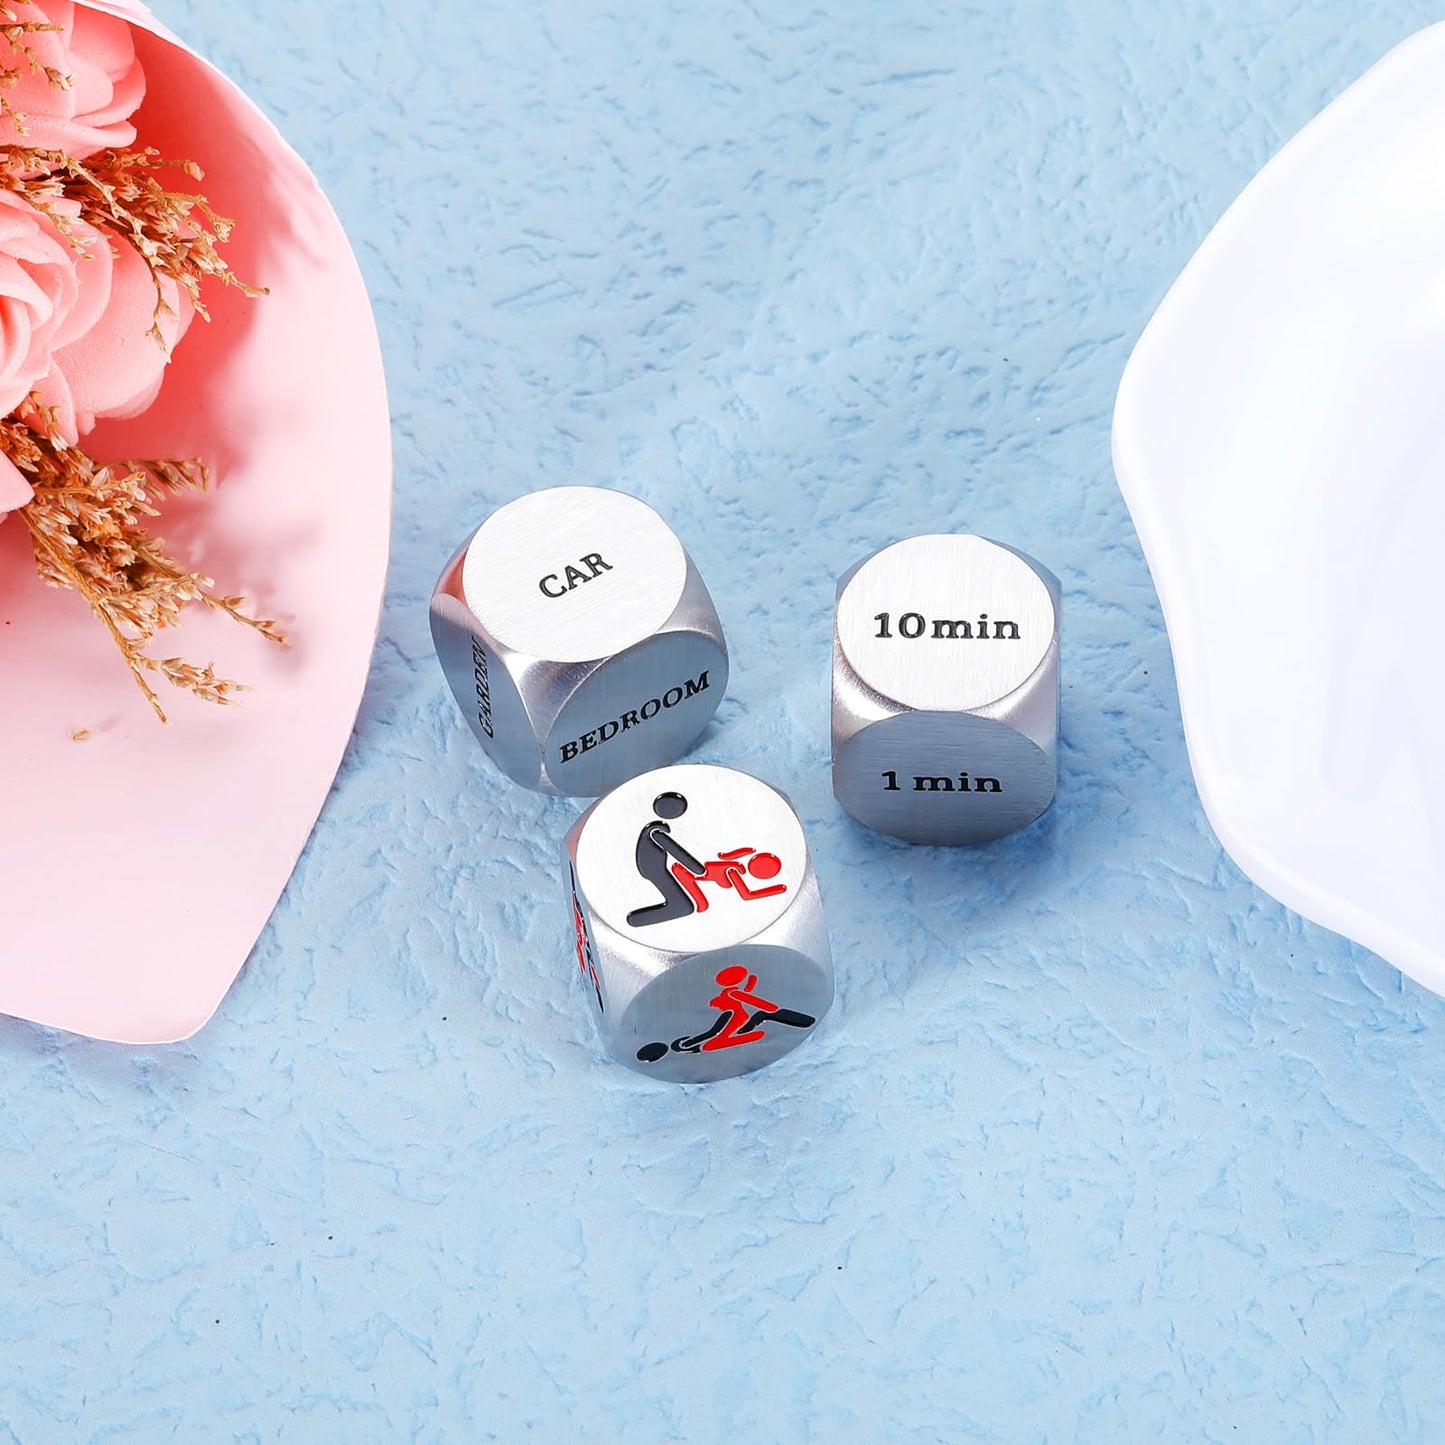 Anniversary Valentines Day Gifts for Him Her Date Night Ideas for Couples Food Decision Dice Christmas Birthday Gifts for Boyfriend Husband from Girlfriend Wife Funny Gifts for Men Women Coworker